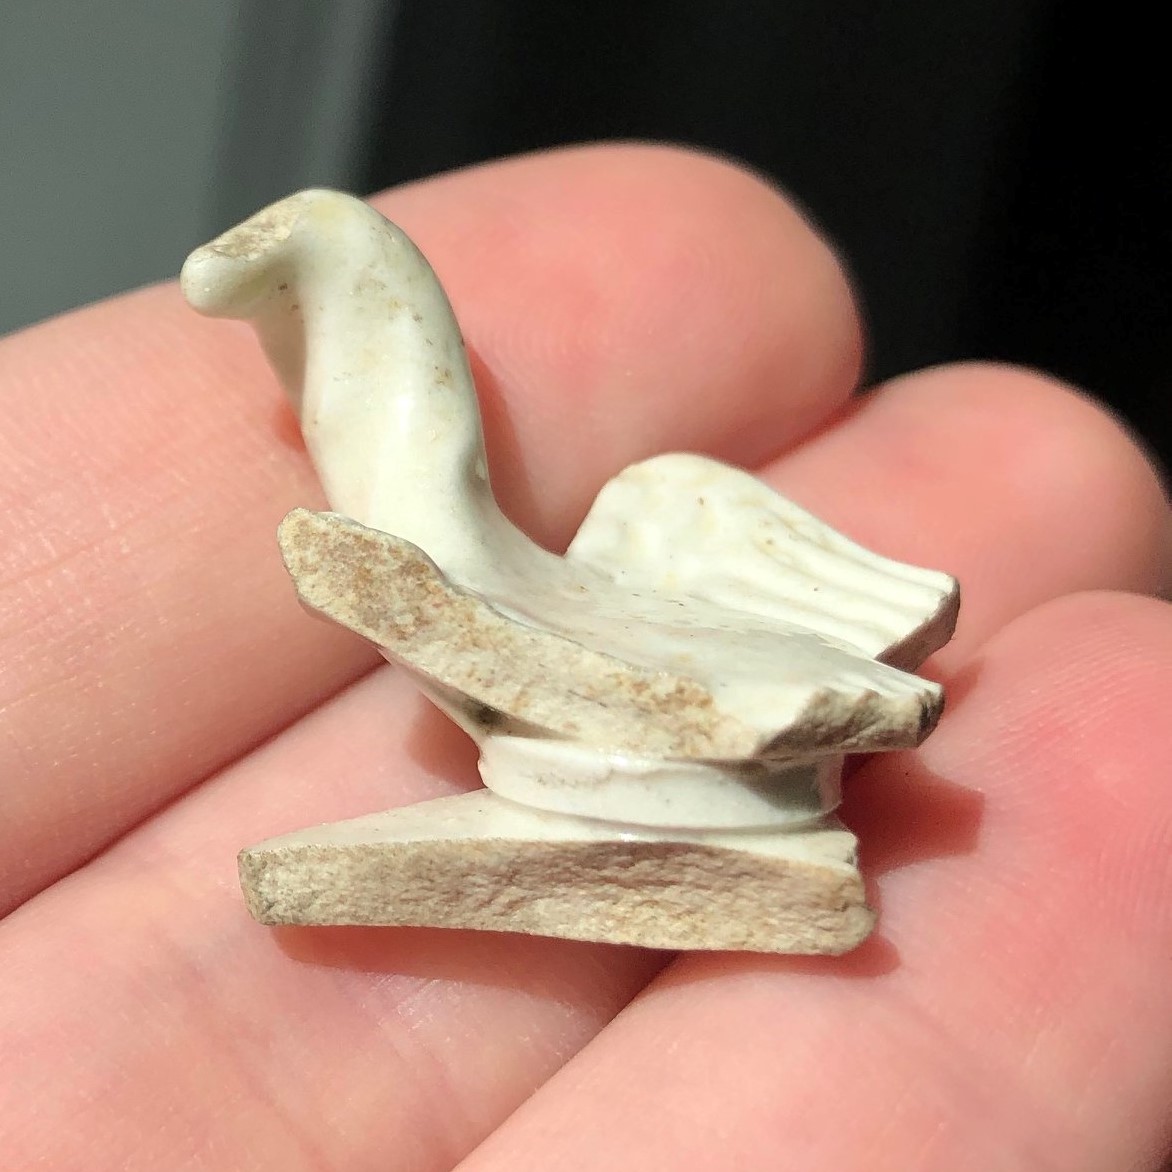 fingers holding a fragment of white ceramic in the shape of a partially-broken bird with turned head and outstretched wings. Fragment is about one inch in all dimensions